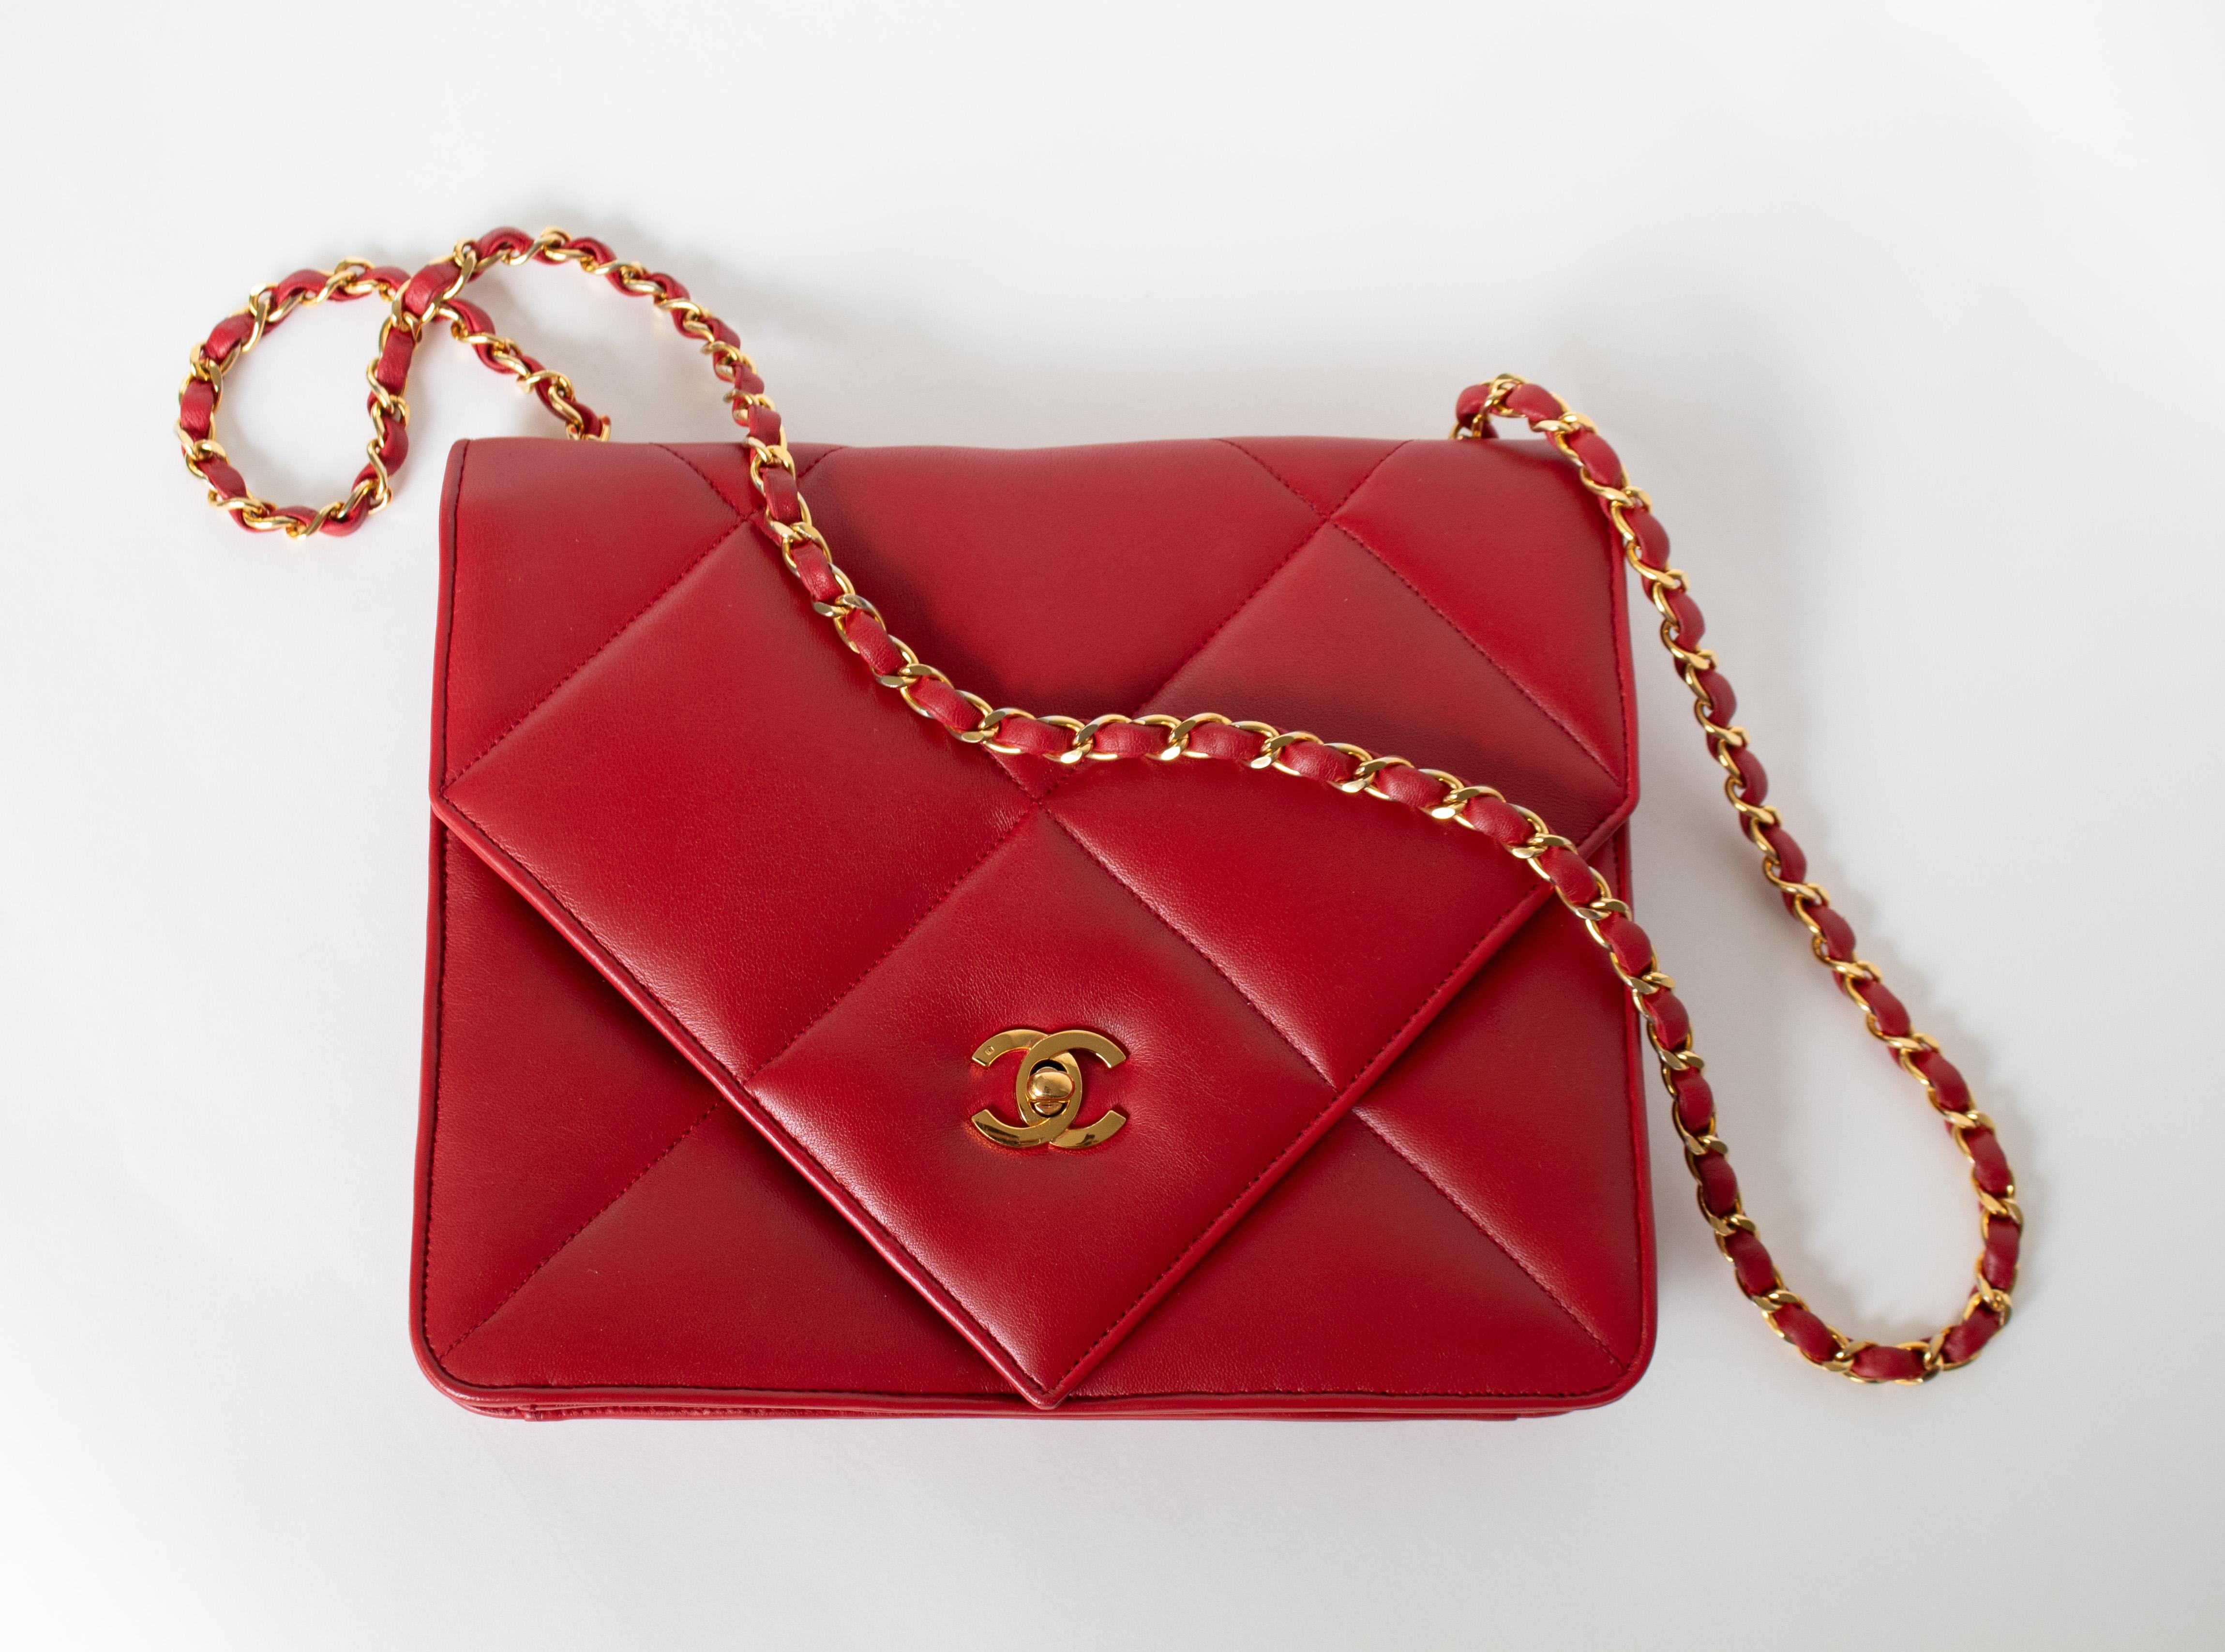 Classic Chanel 19 Vintage Rare 90s Jumbo Lambskin Red Envelope Flap Bag  For Sale 7